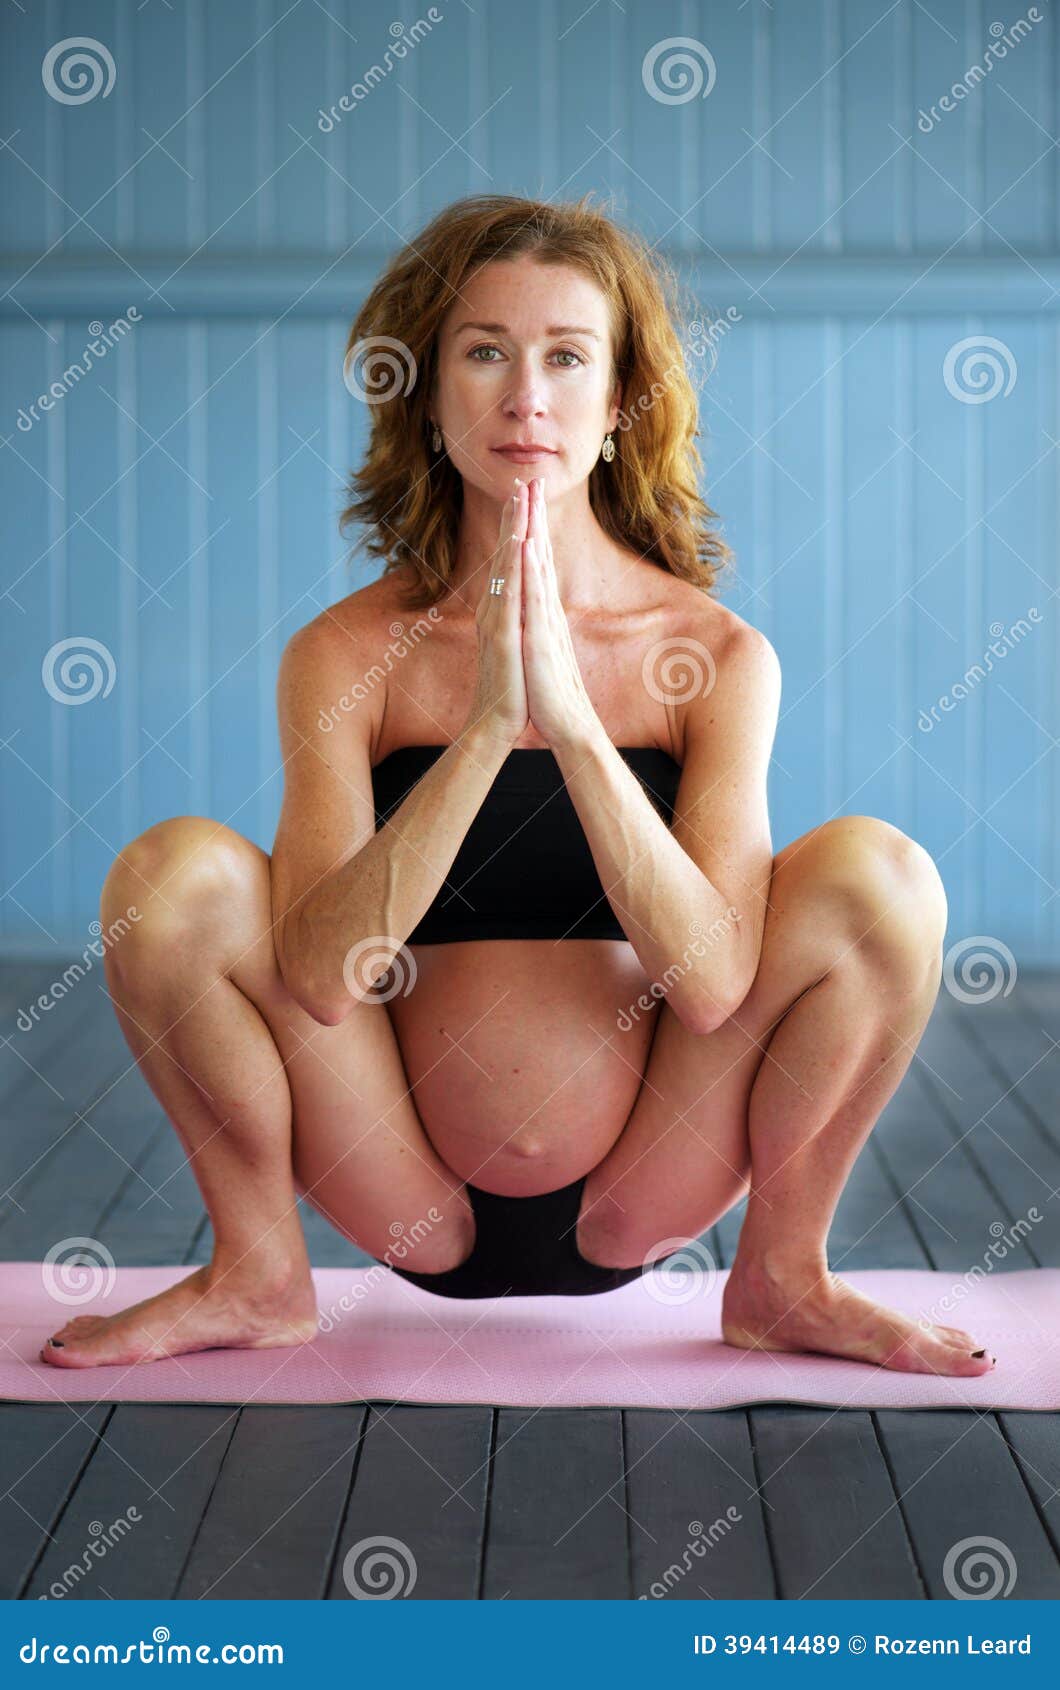 Yoga For Third Trimester: My Favorite Poses